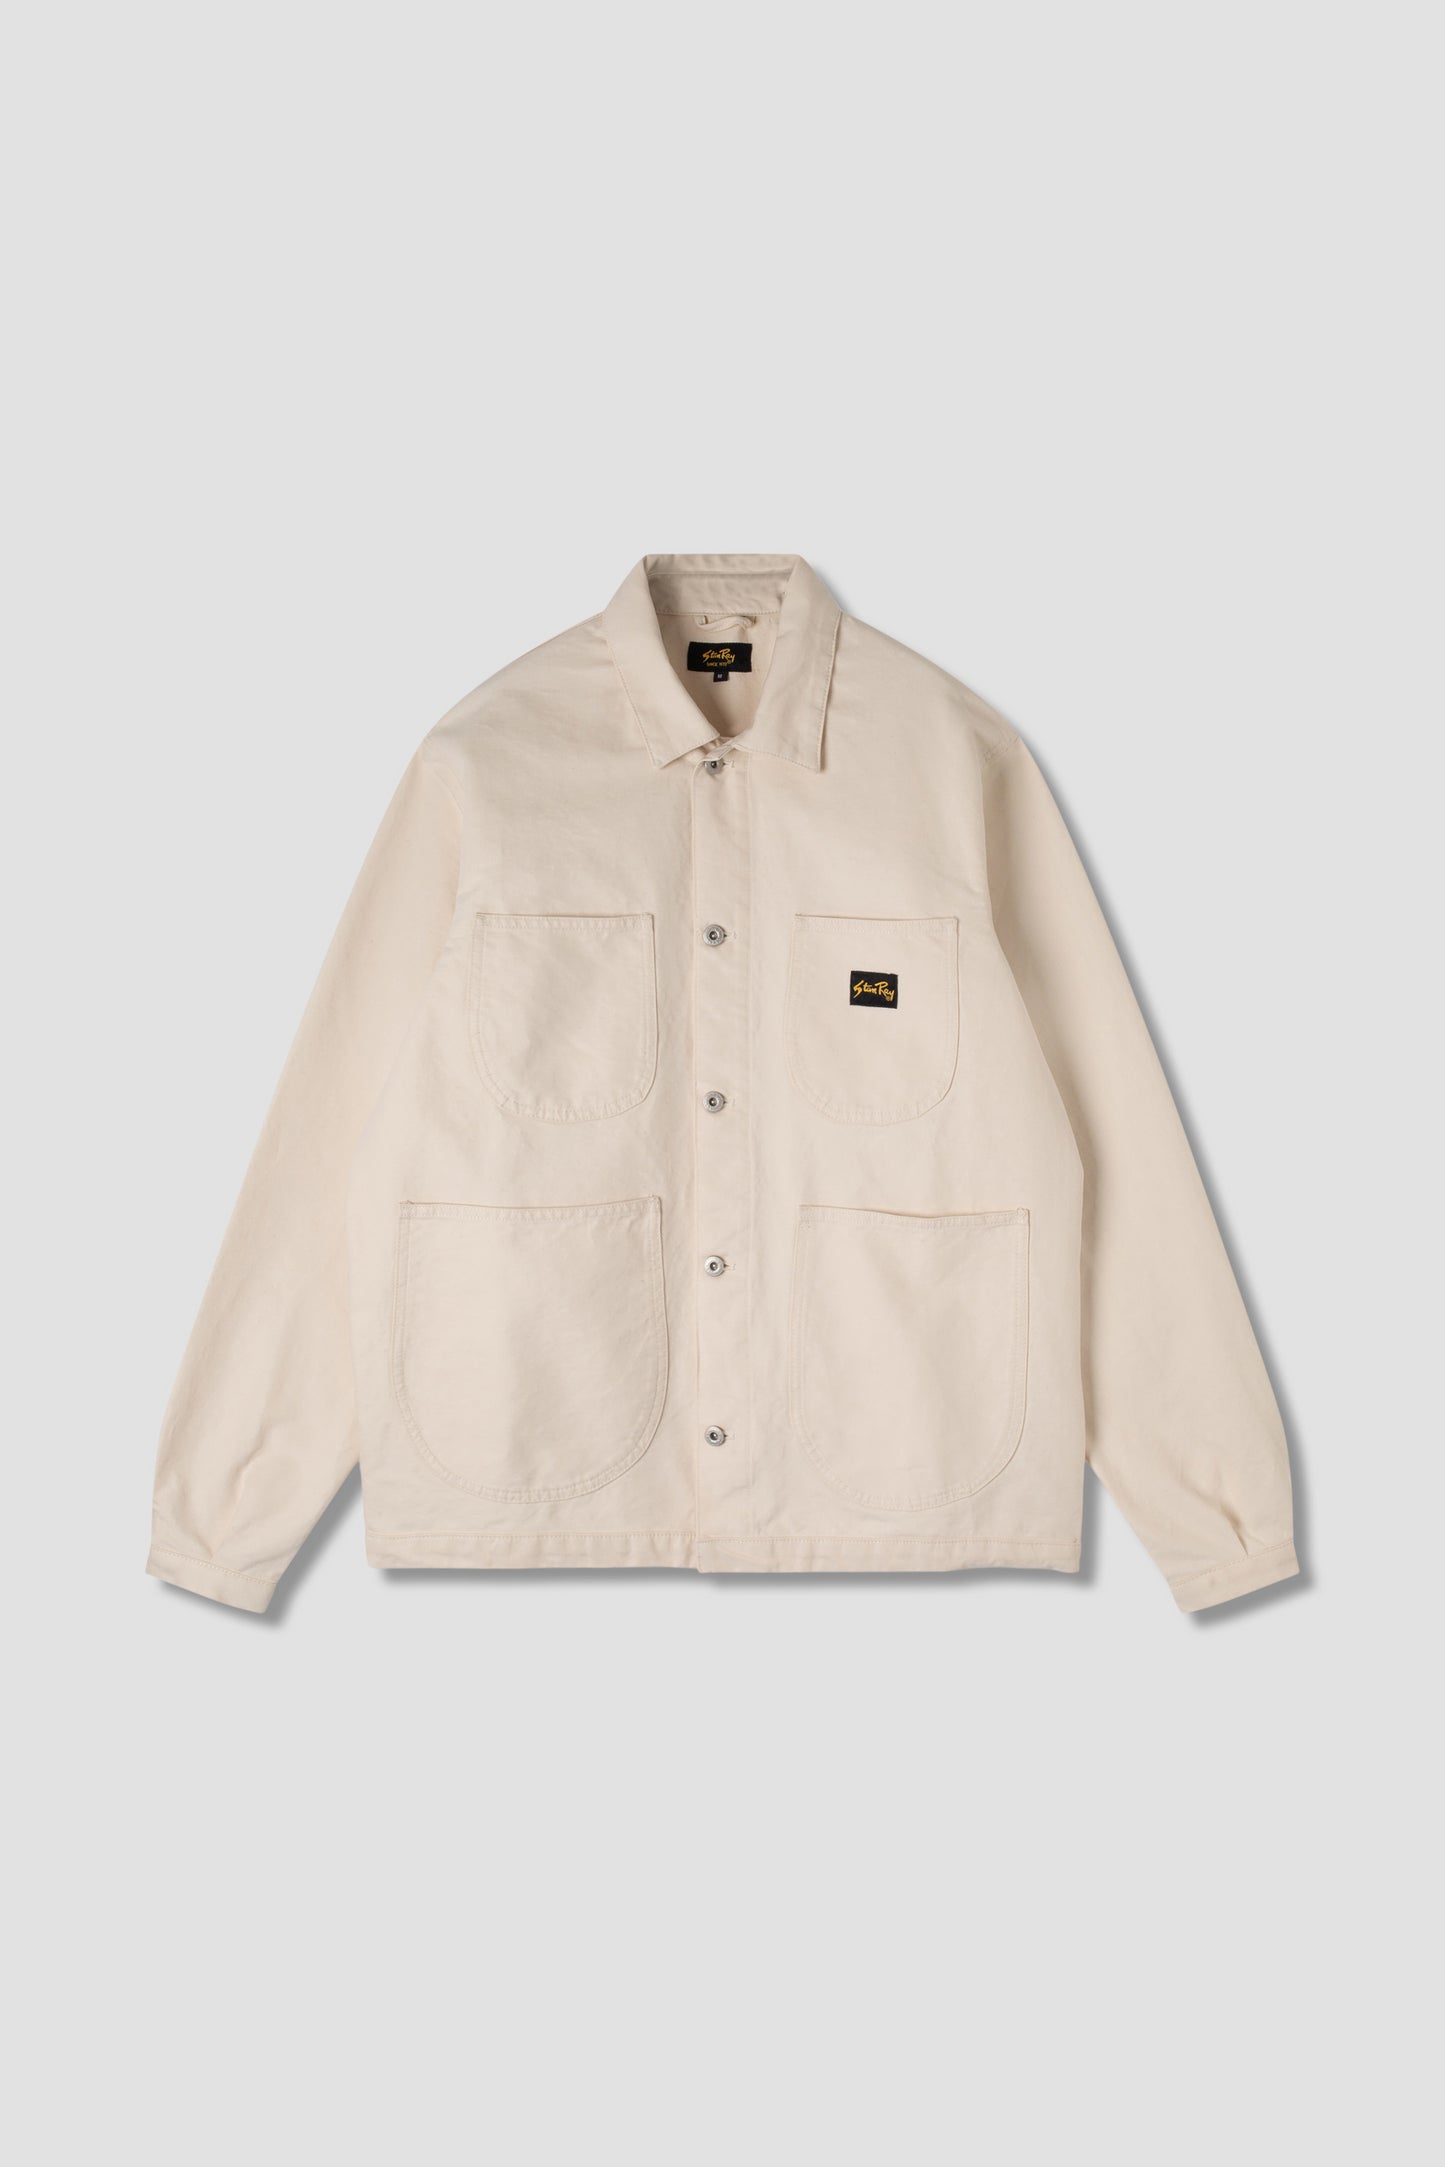 Coverall Jacket (Unlined) (Natural Twill)